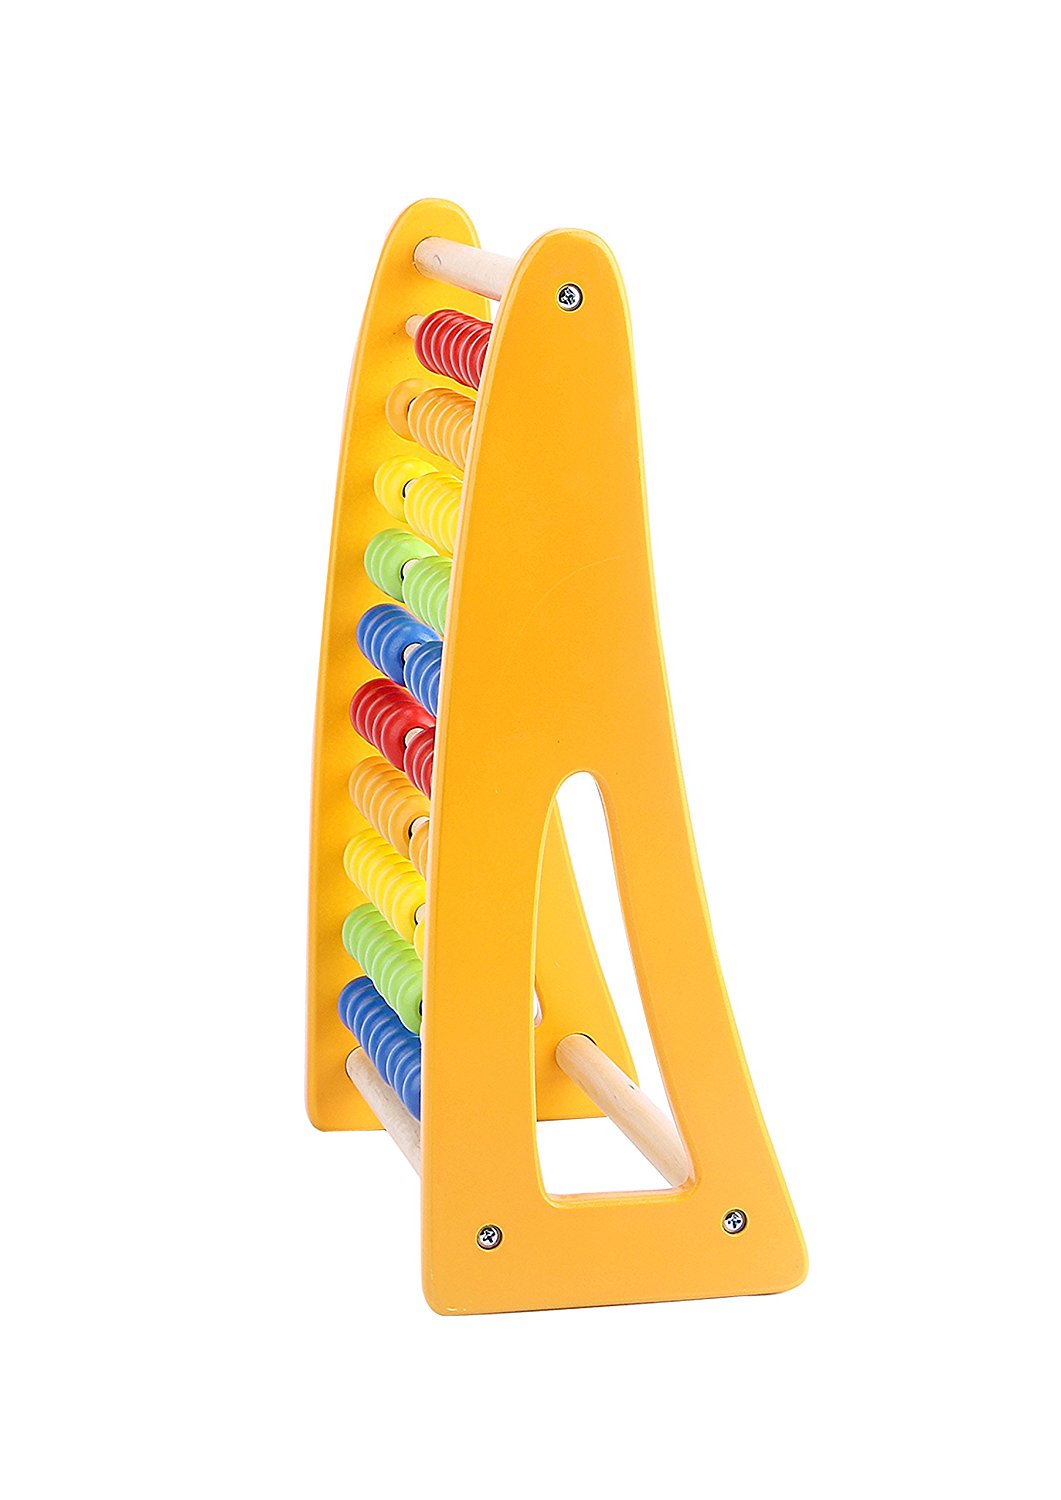 Abacus Classic Wooden Toy